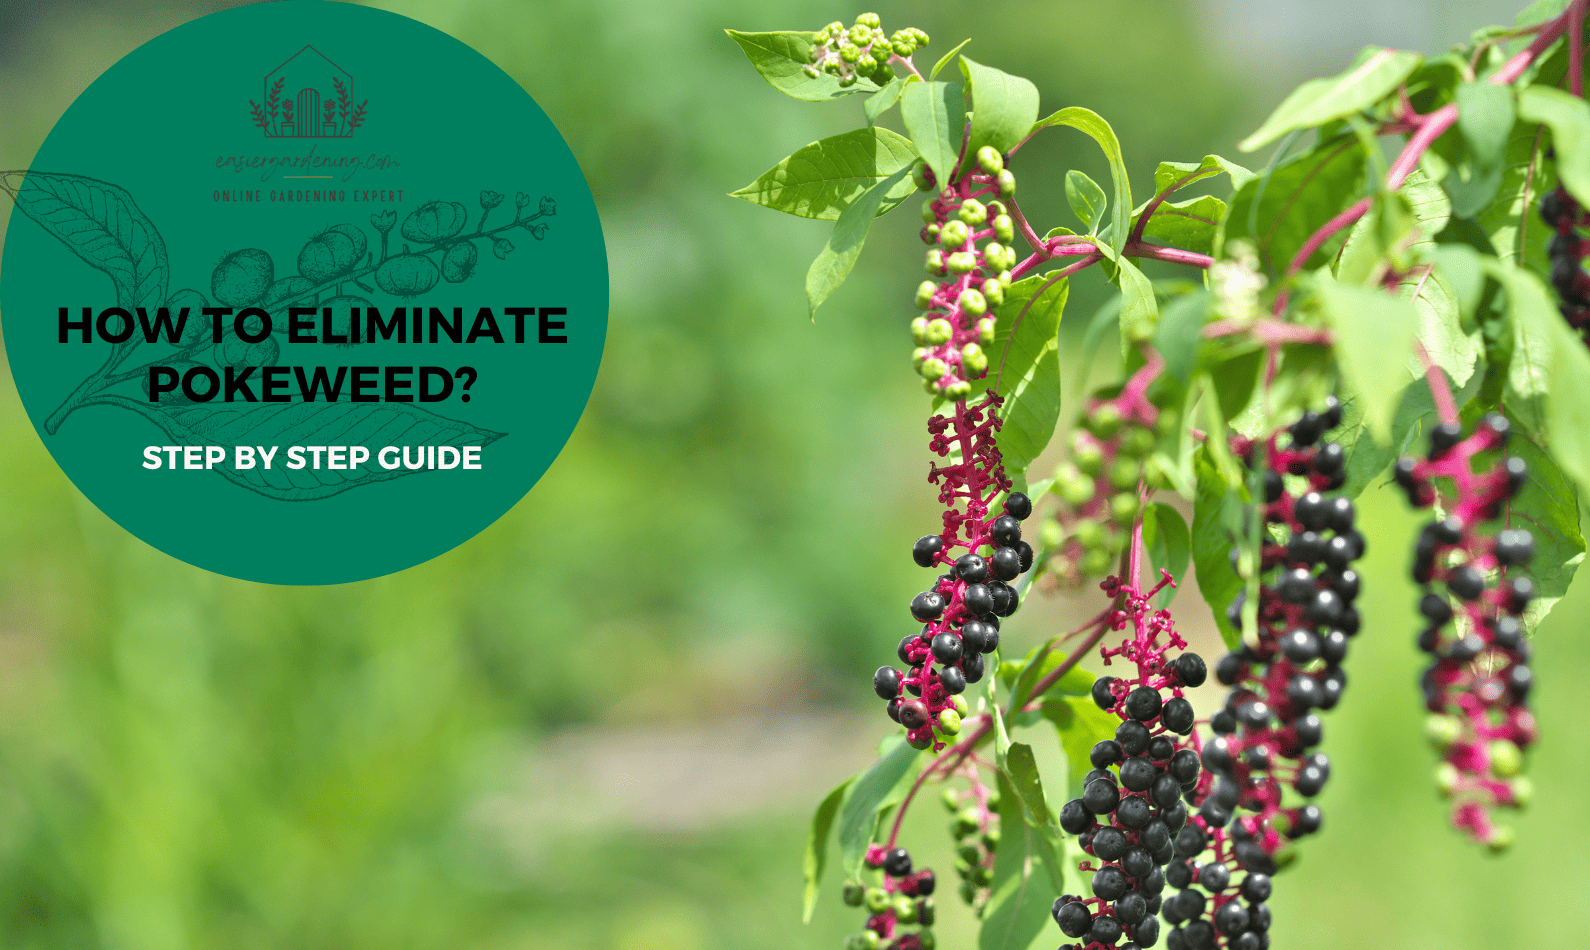 How to Eliminate Pokeweed?